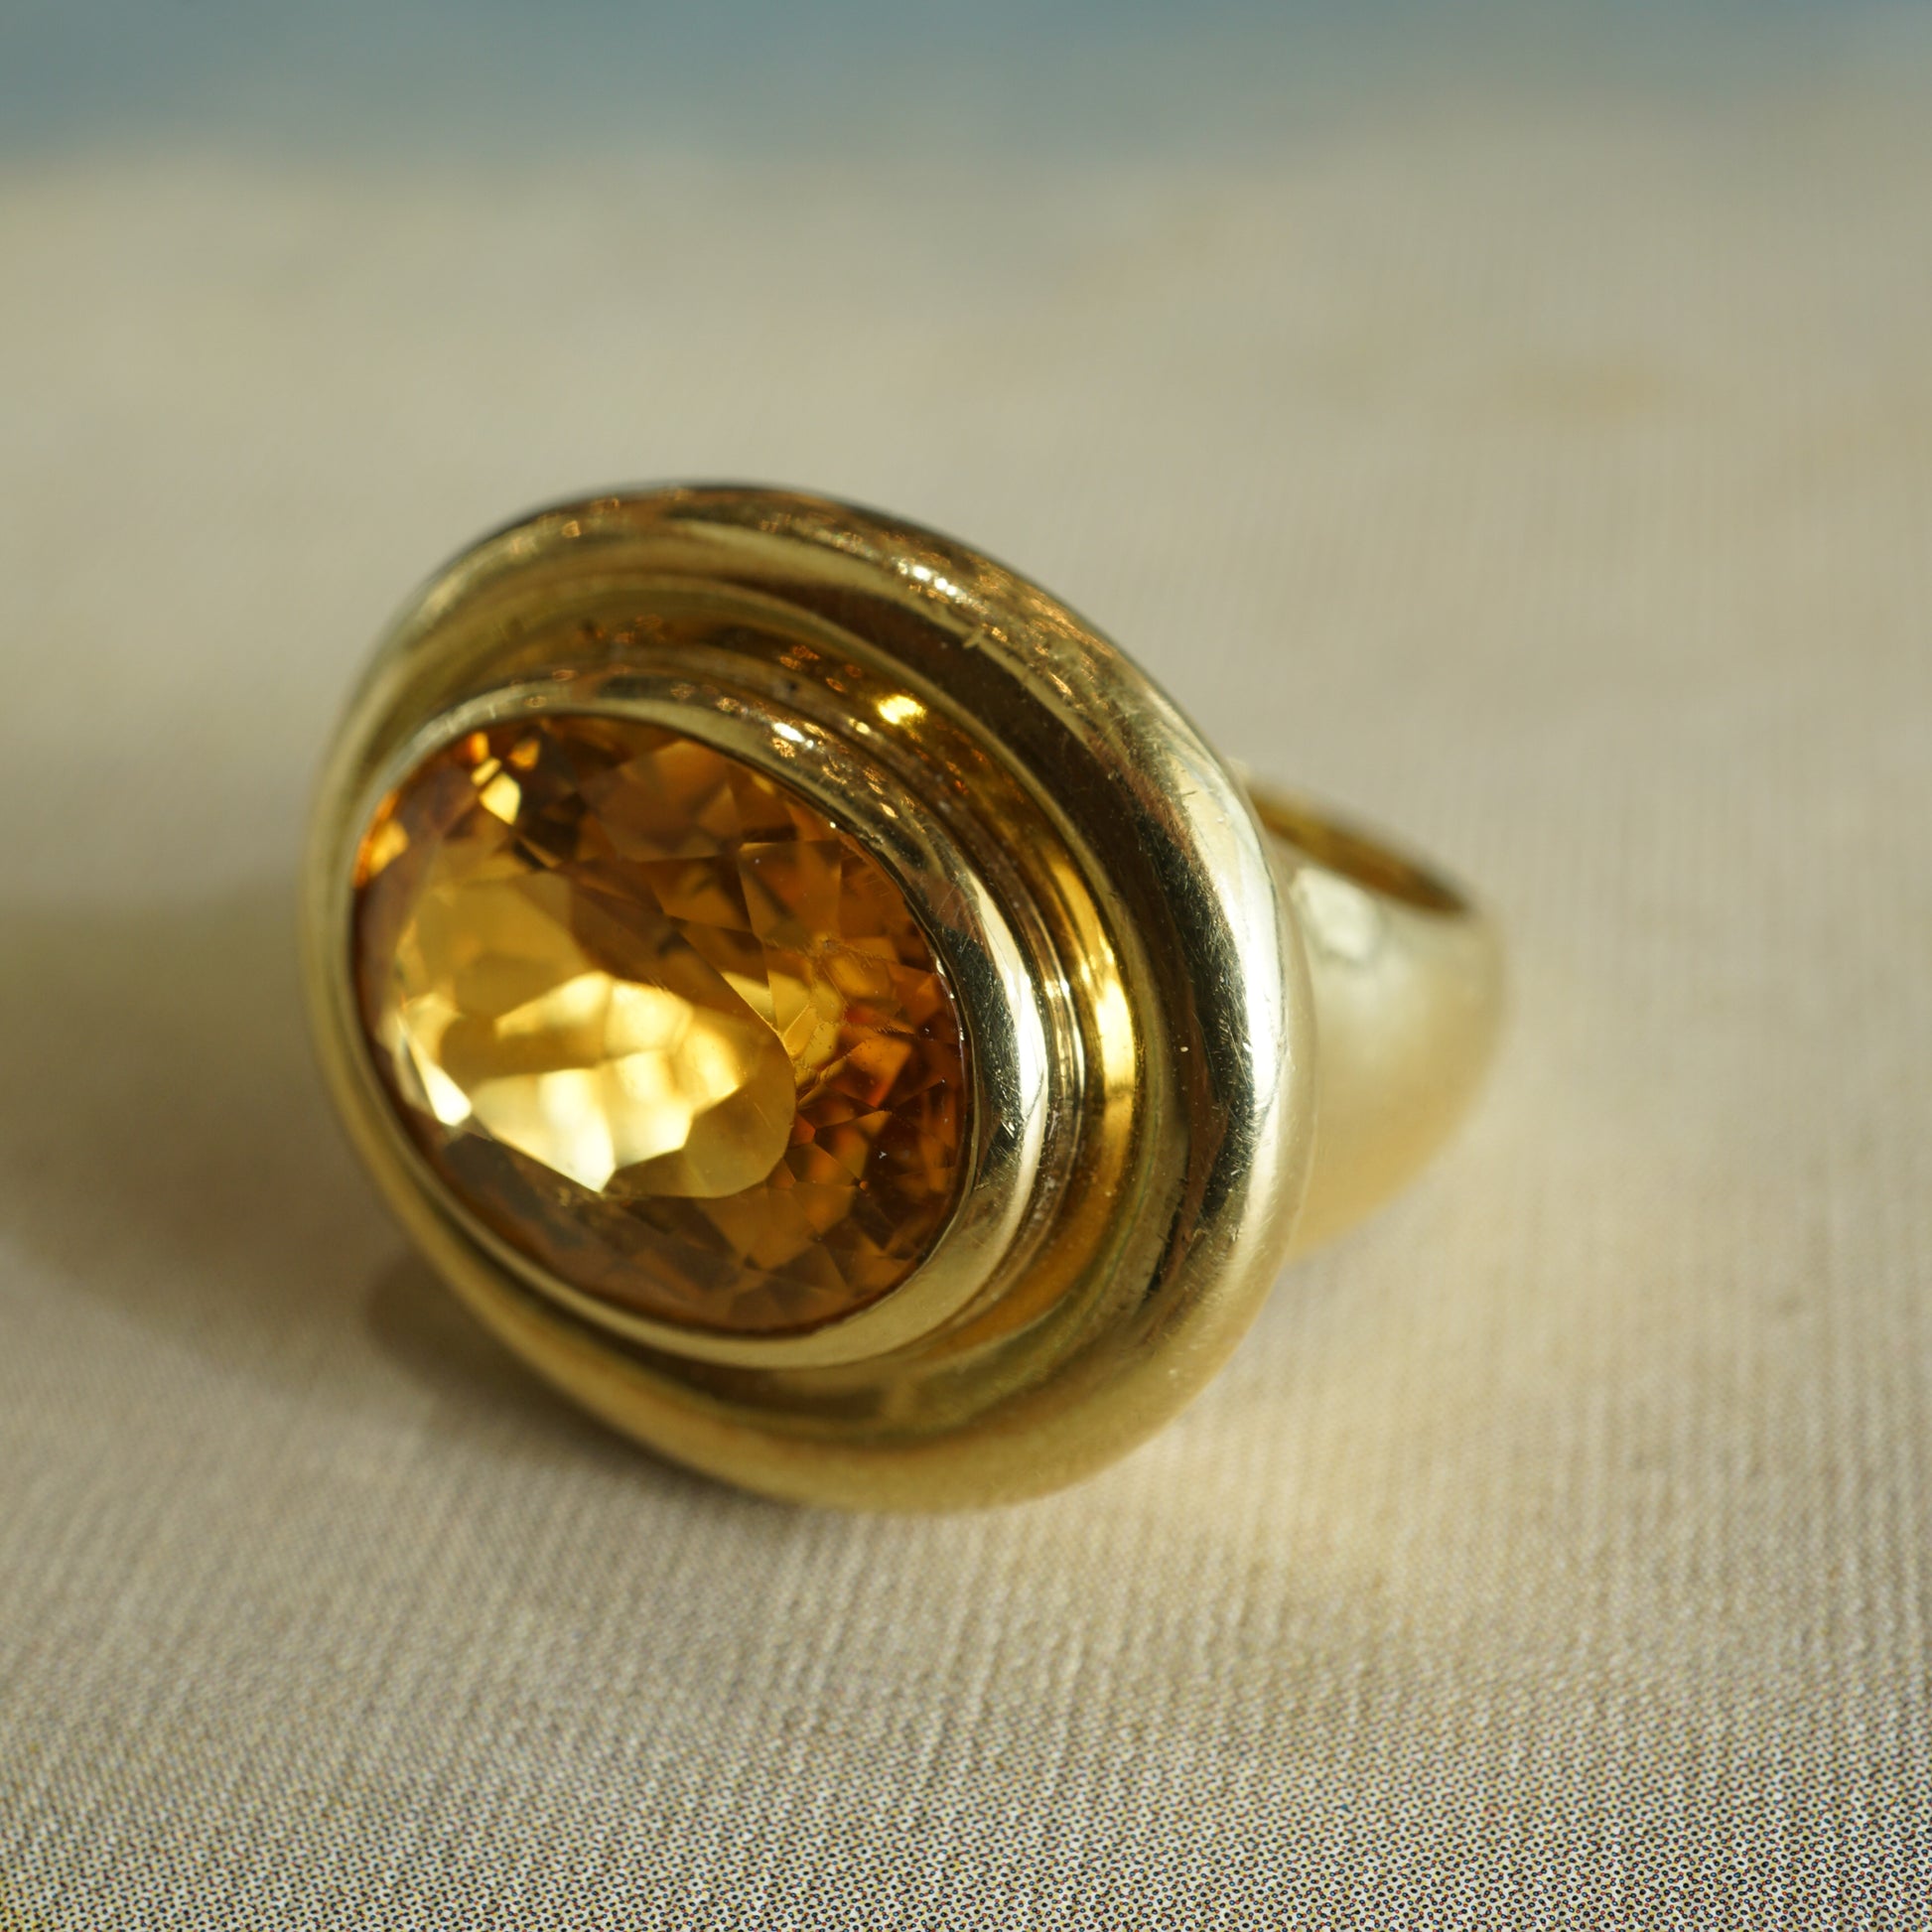 Mid-Century Citrine Cocktail Ring in 18k Yellow Gold